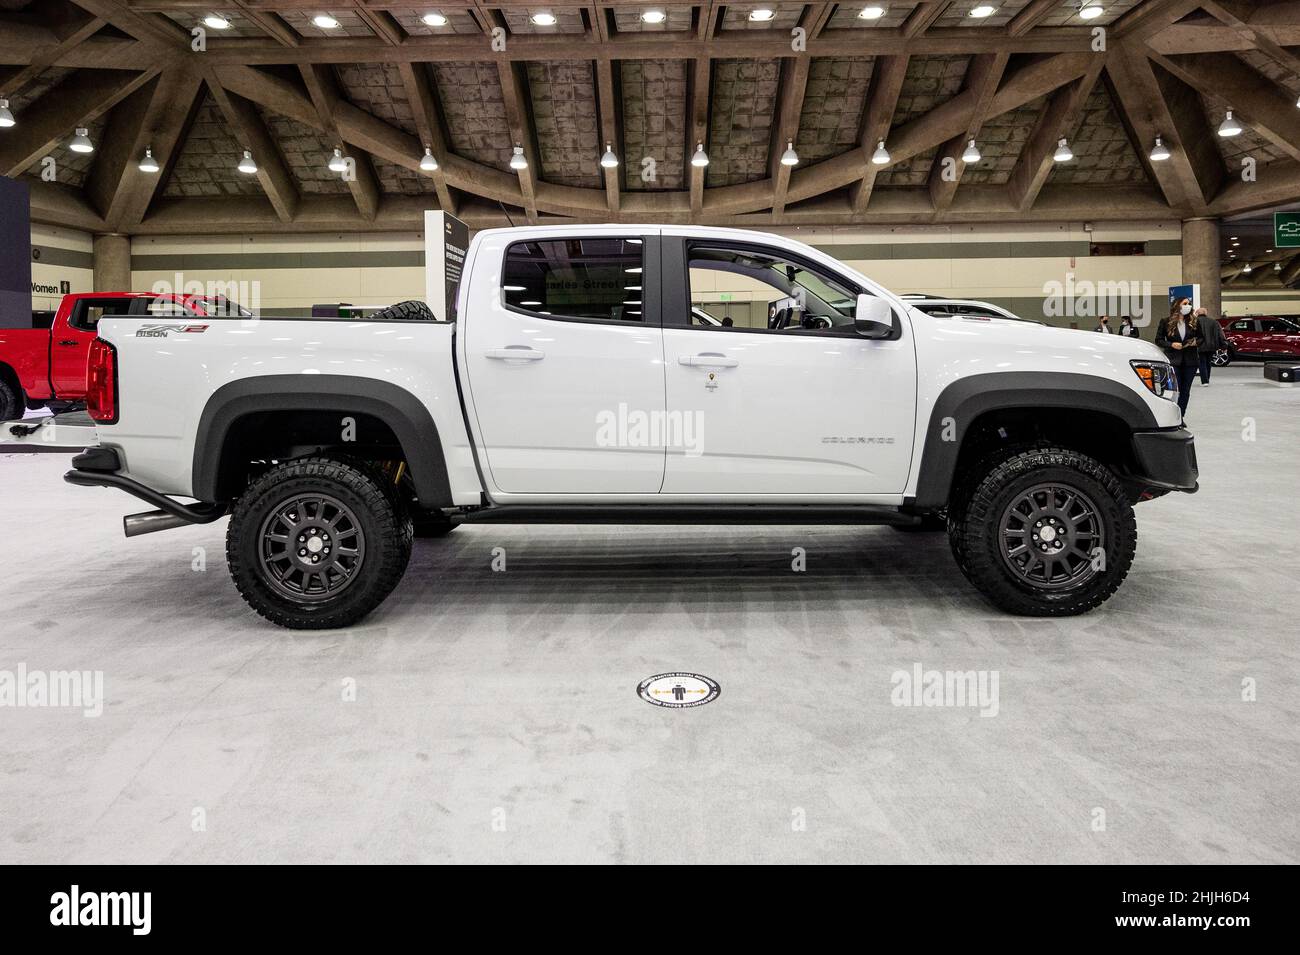 Baltimore, United States. 28th Jan, 2022. January 28, 2022 - Baltimore, MD, United States: A 2022 Chevrolet Colorado ZR2 Bison at the Maryland Auto Show. (Photo by Michael Brochstein/Sipa USA) Credit: Sipa USA/Alamy Live News Stock Photo